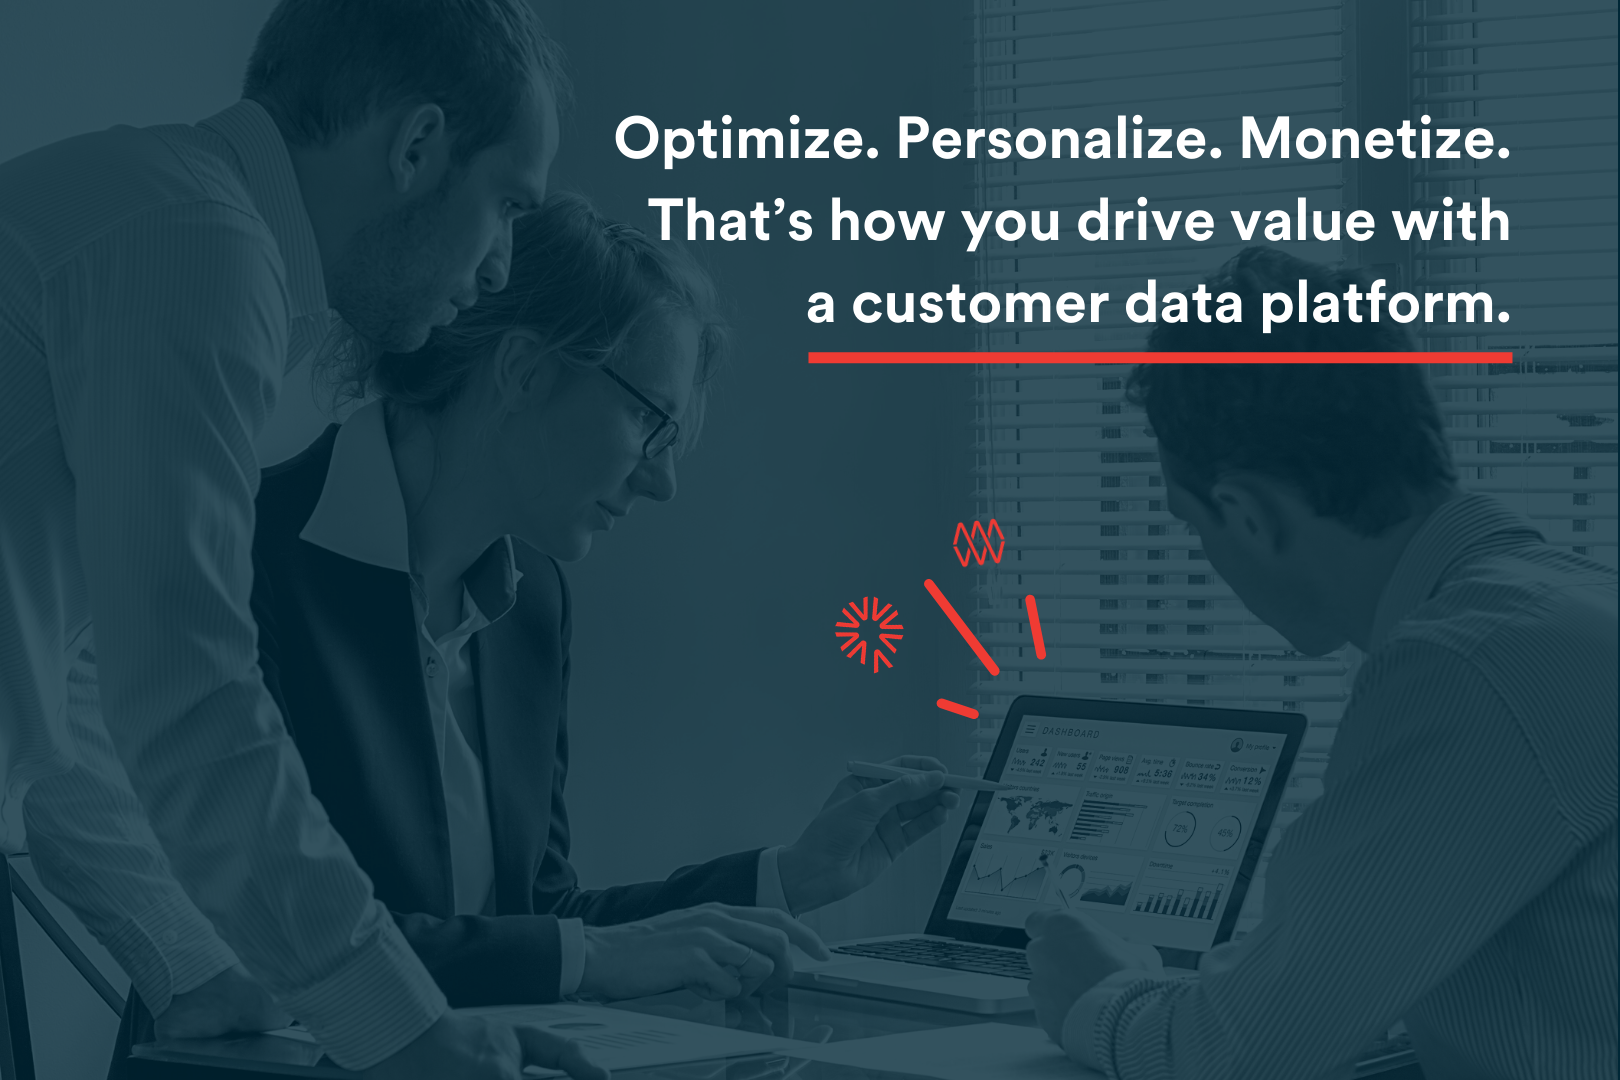 Blog Image - Optimize. Personalize. Monetize. That’s how you drive value with a customer data platform.